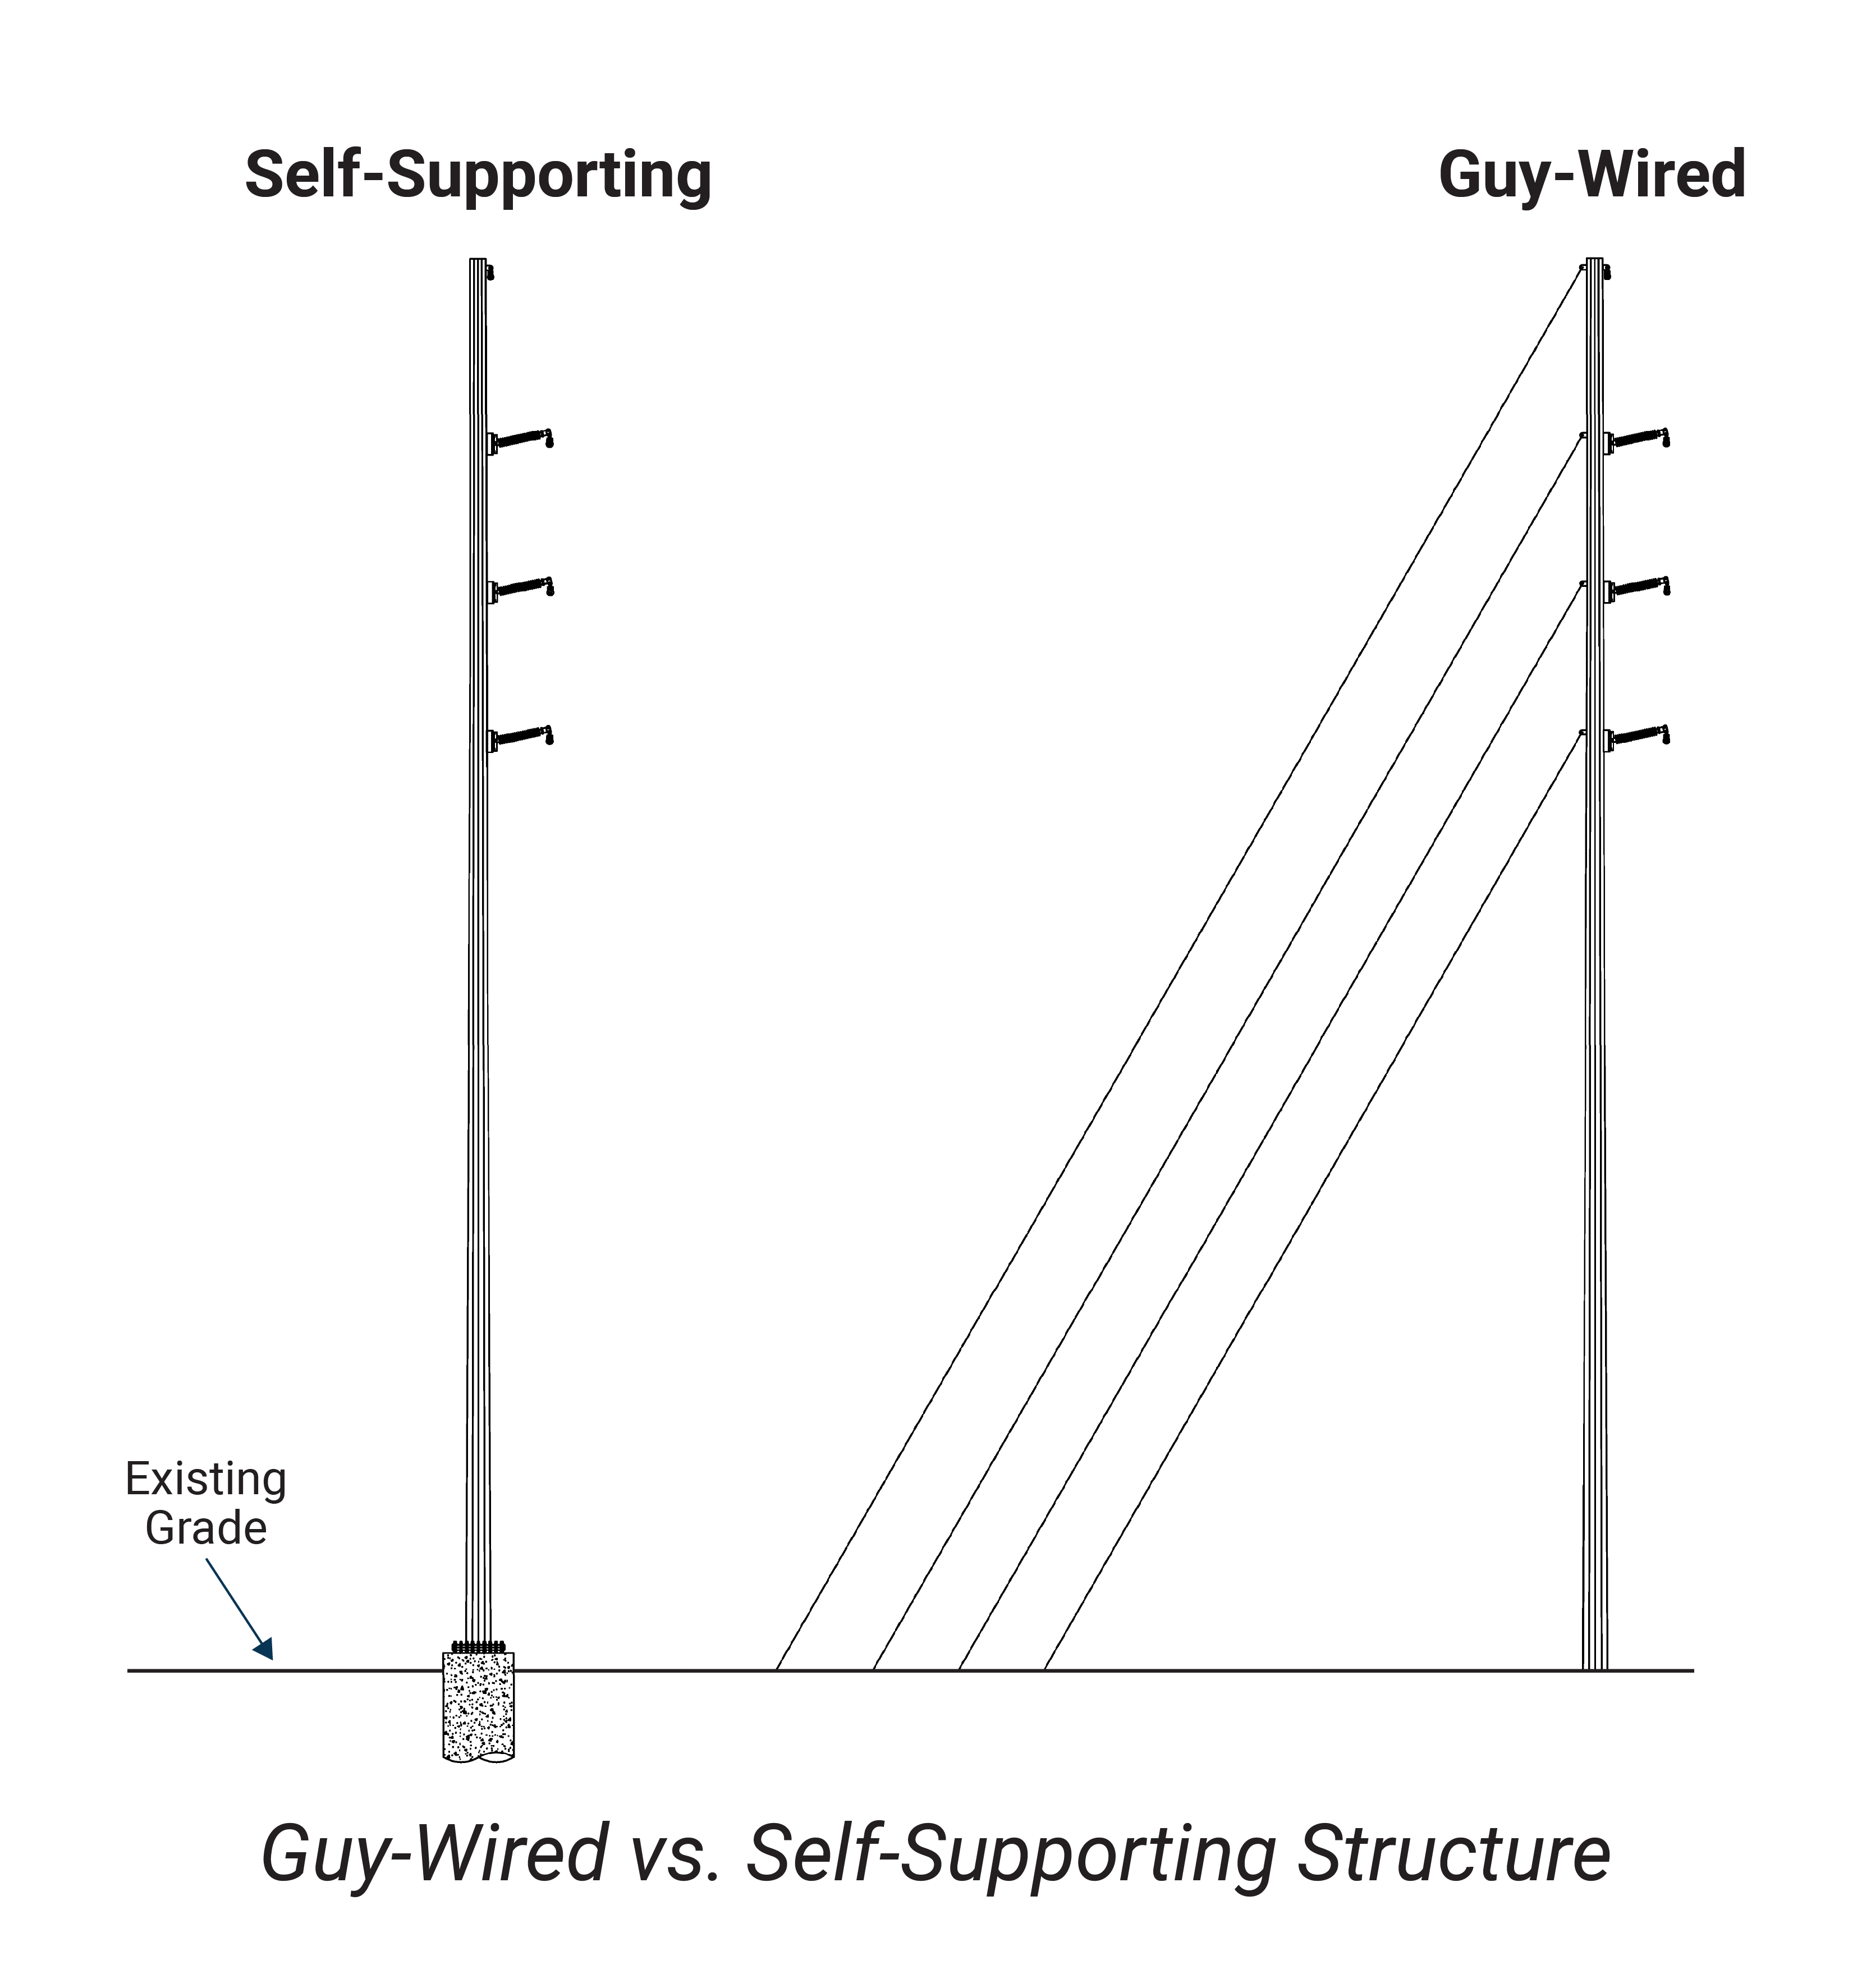 image of pole diagram showing guy-wired vs. self-supporting structure